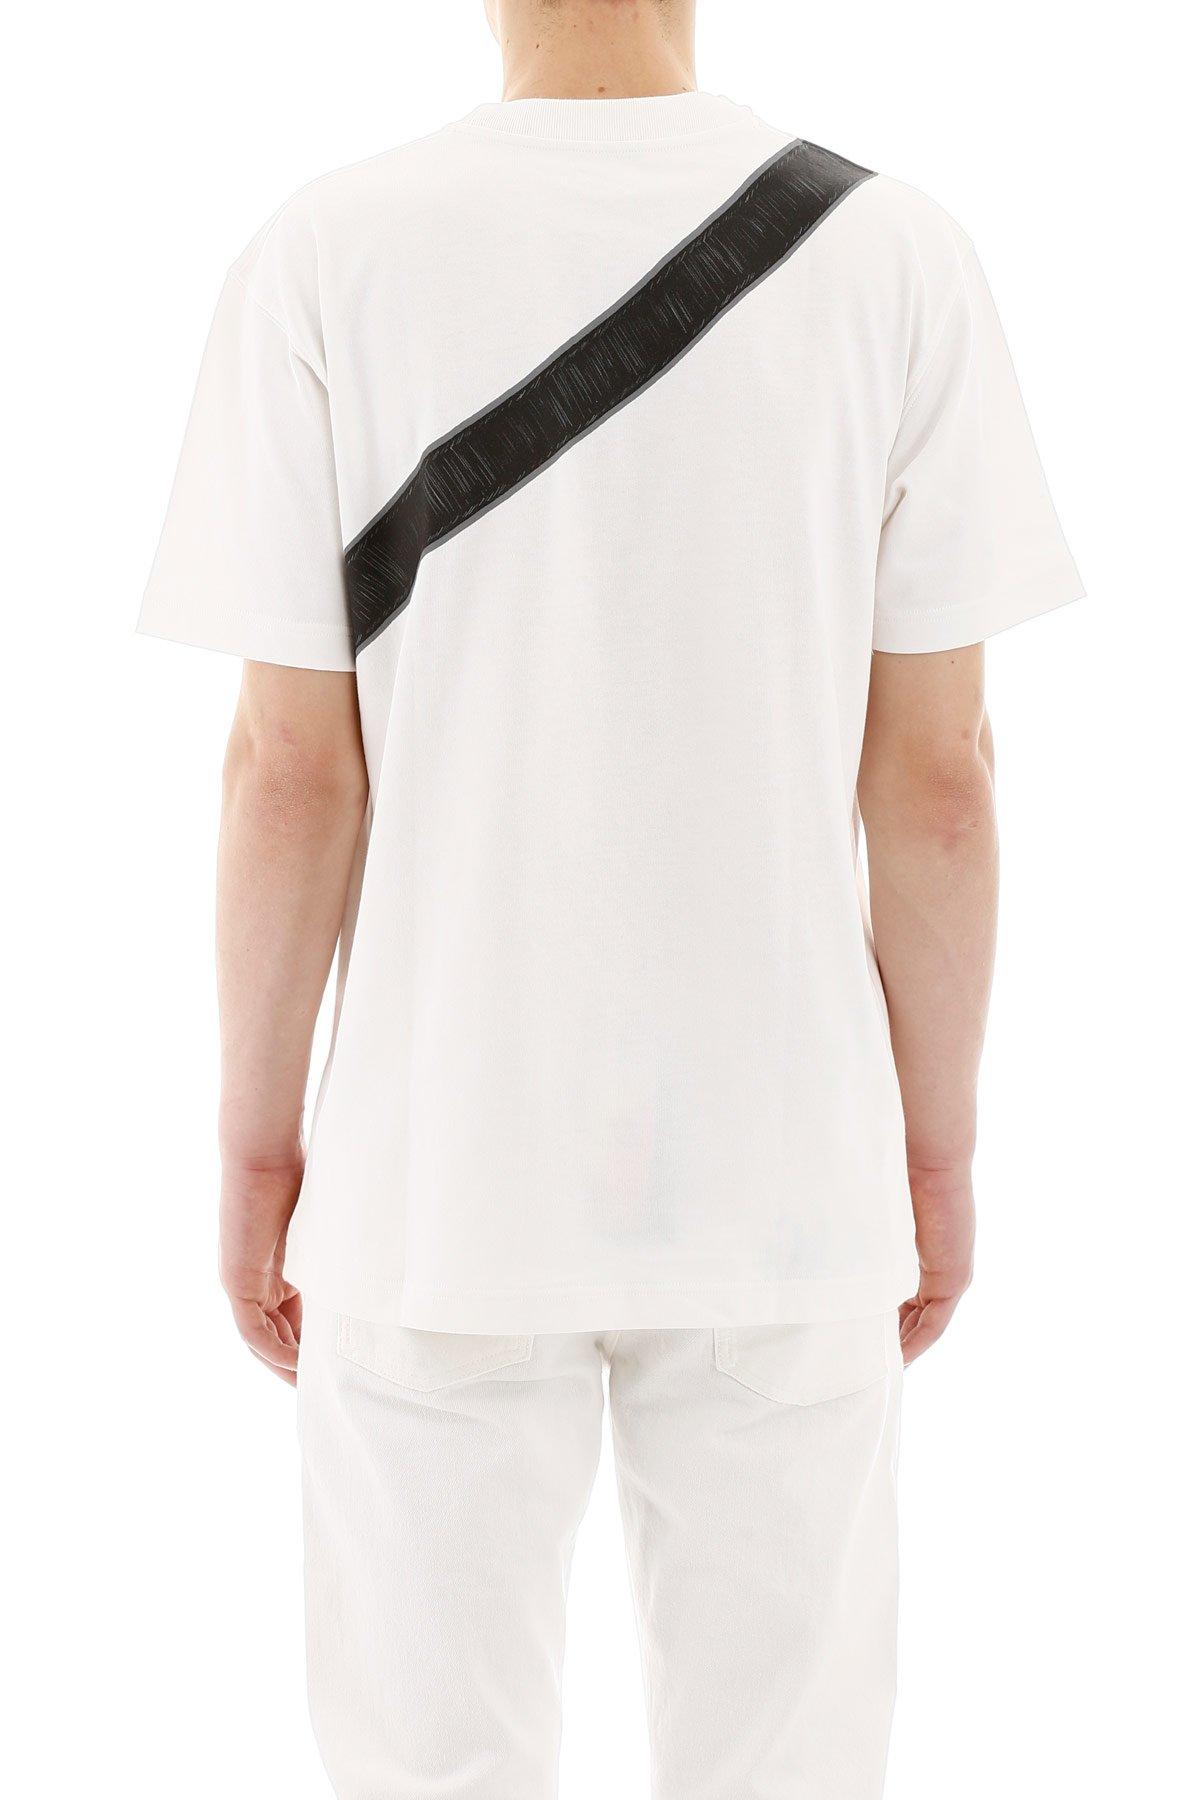 Dior Cotton Saddle Bag Print T-shirt in White for Men - Lyst